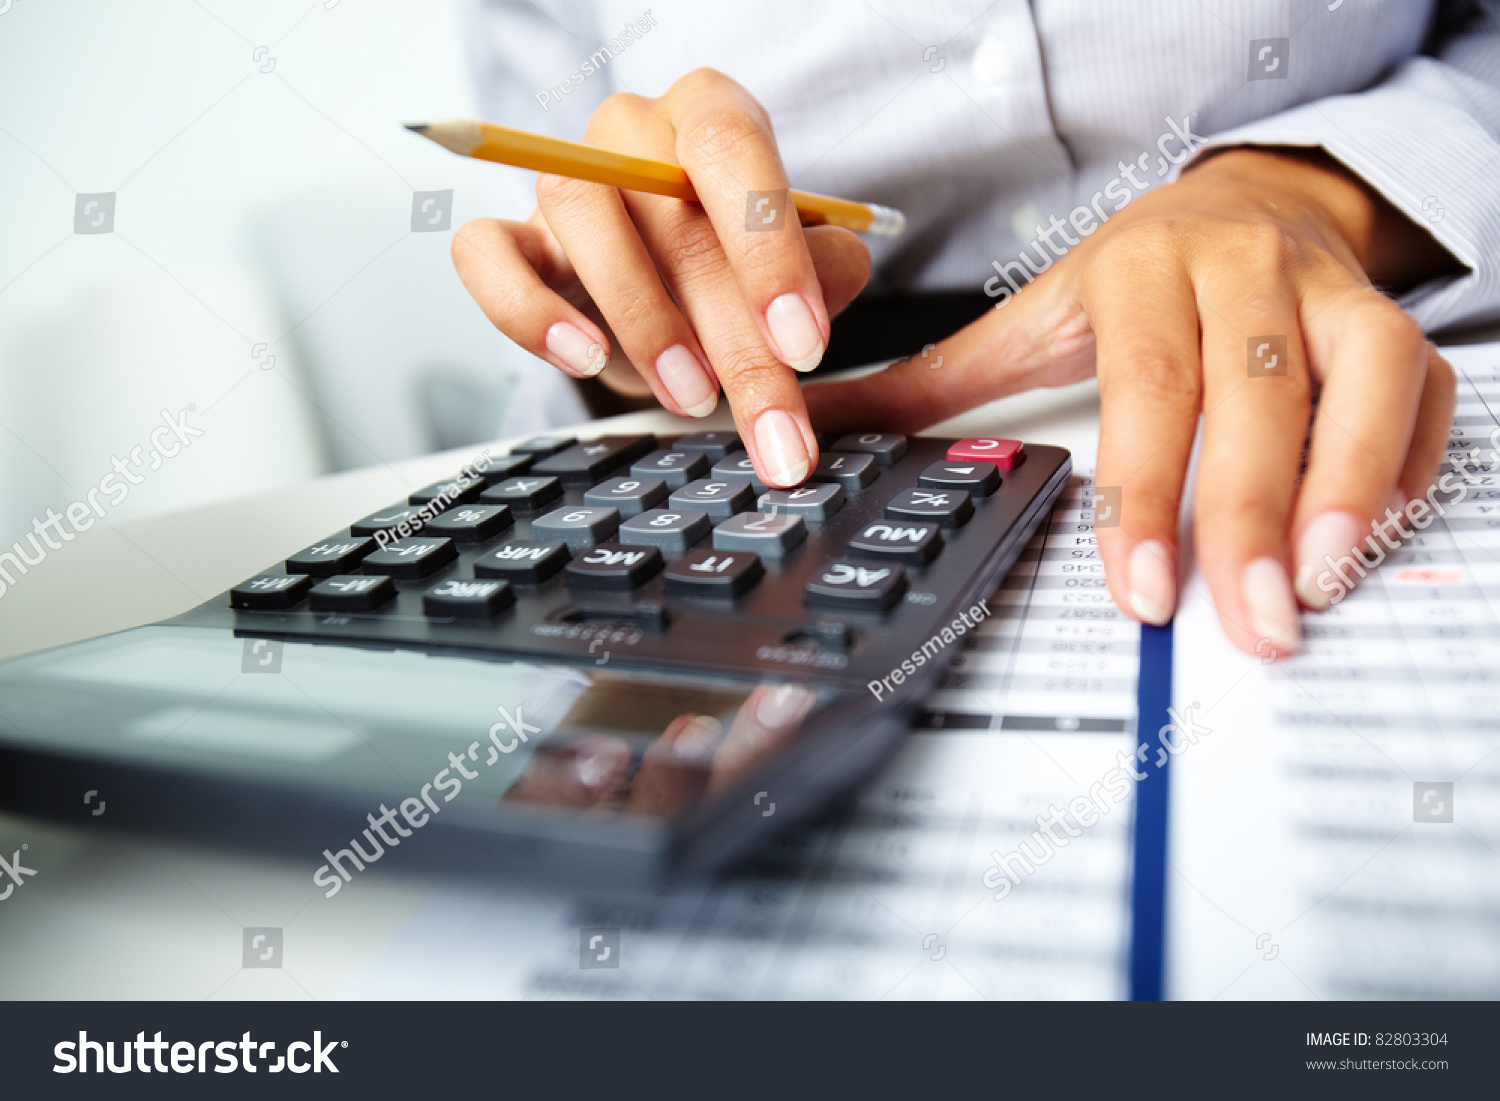 Photo of hands holding pencil and pressing calculator buttons over documents #82803304